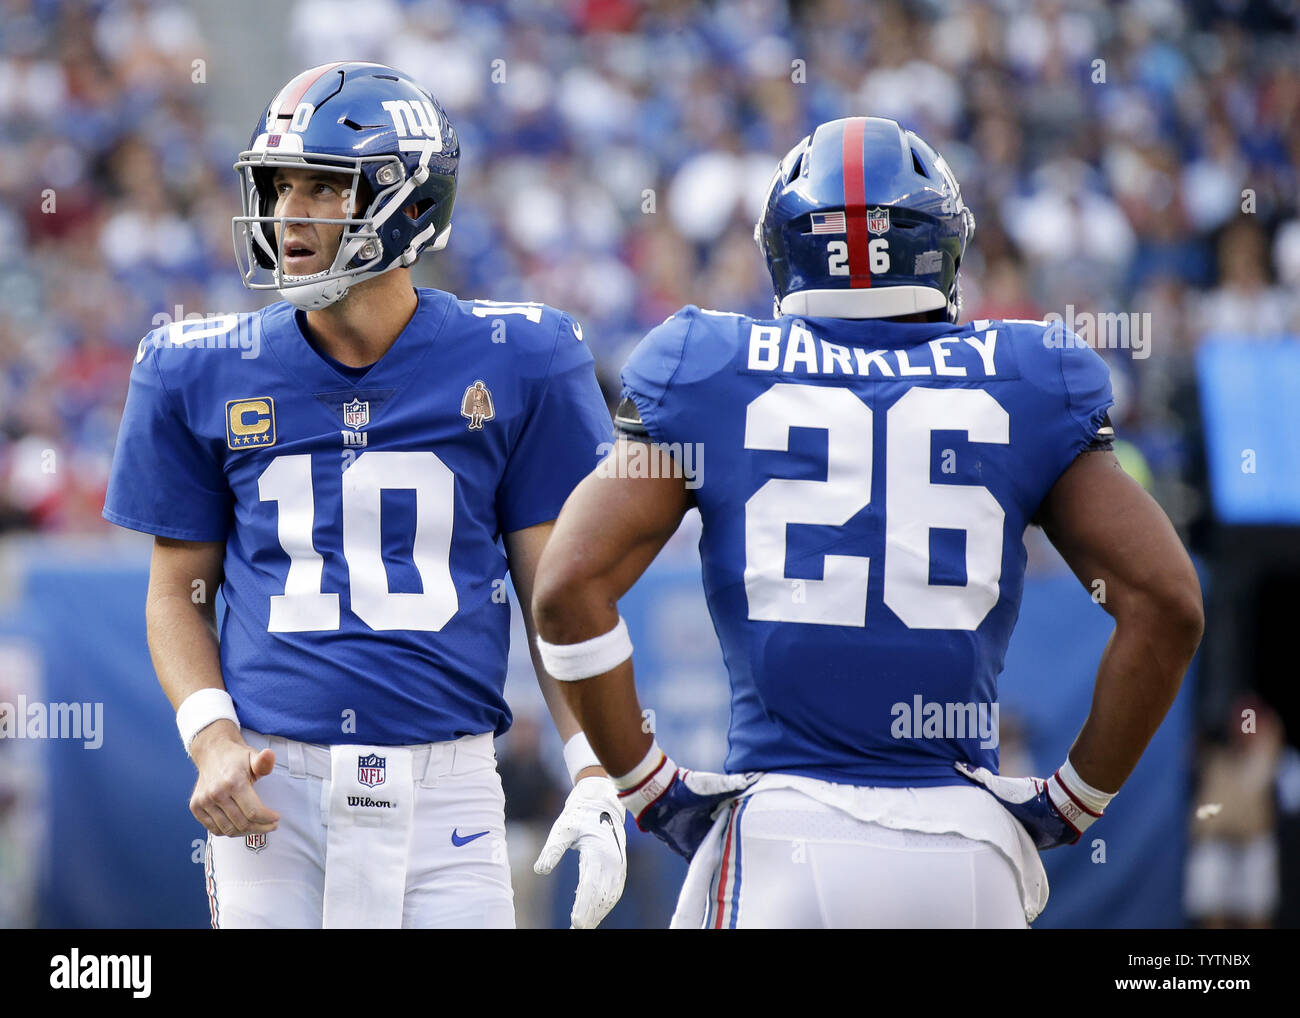 New York Giants Eli Manning stands with Saquon Barkley on the field before  a play in the first half against the New Orleans Saints in week 4 of the  NFL season at